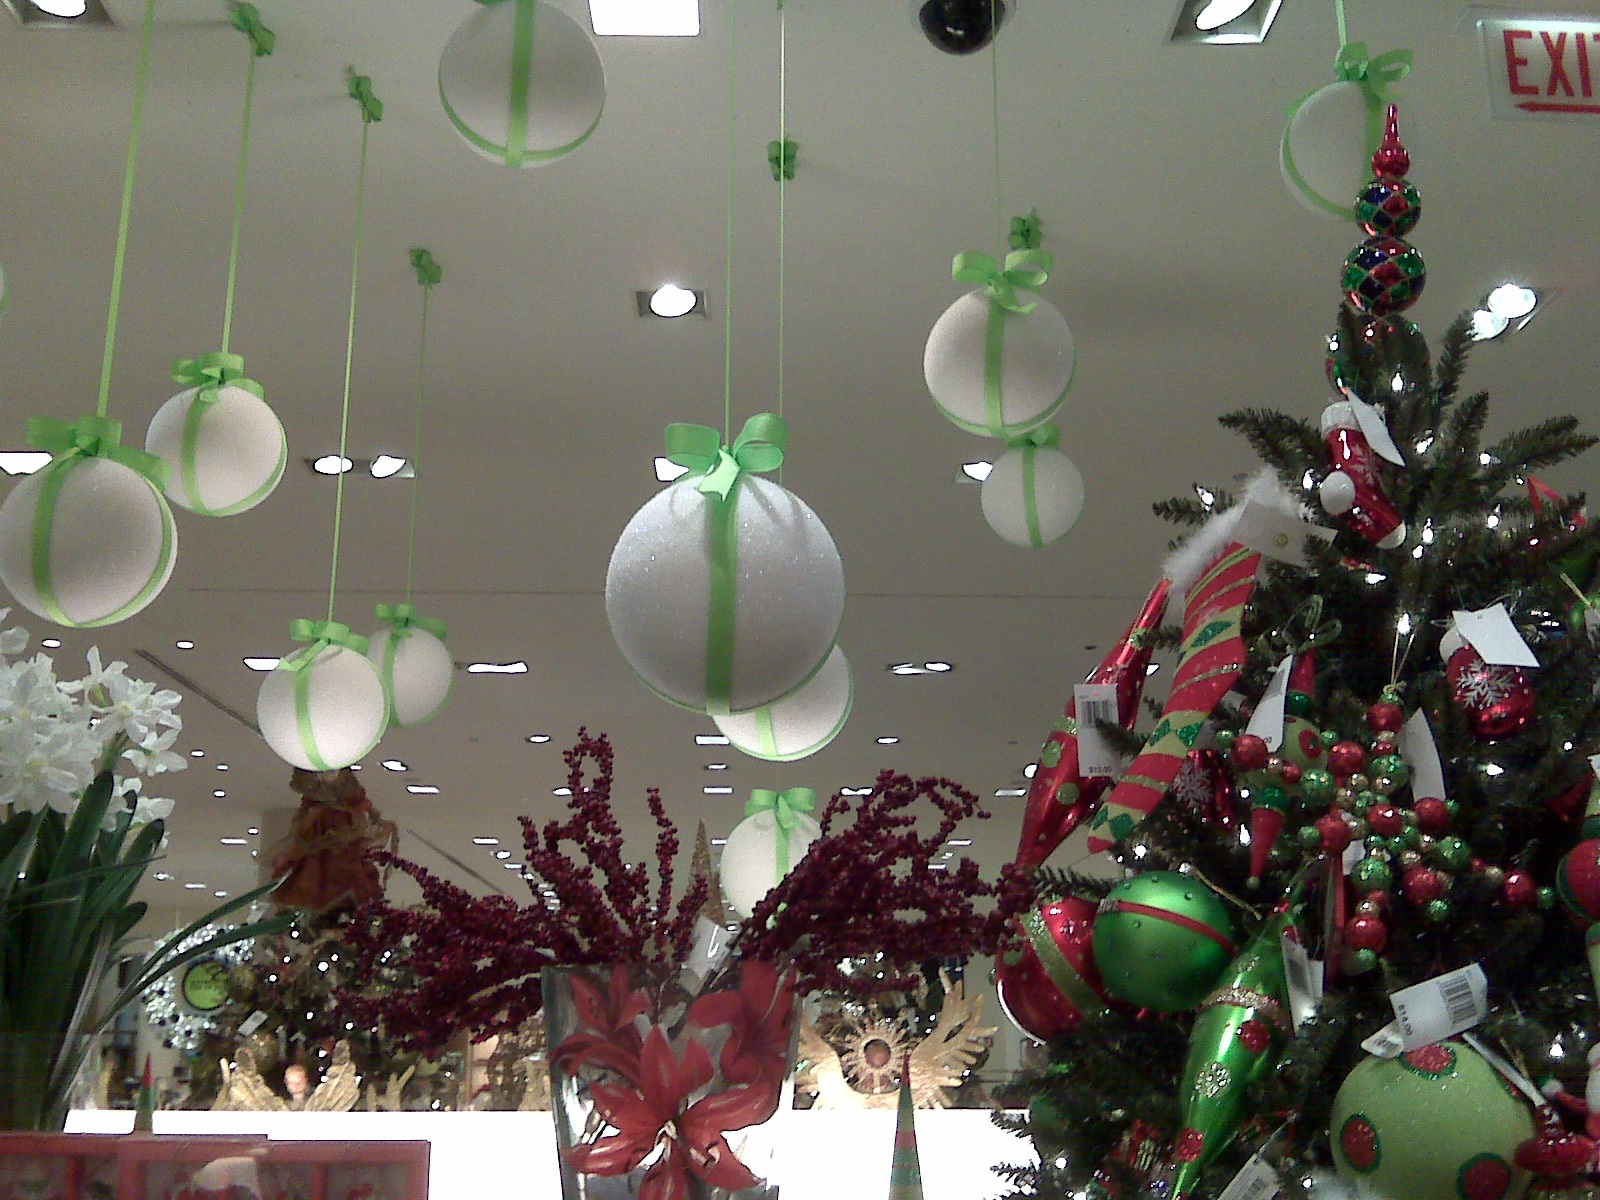 THE NEWS from EventWorks, Inc. It's A Green Holiday Season!